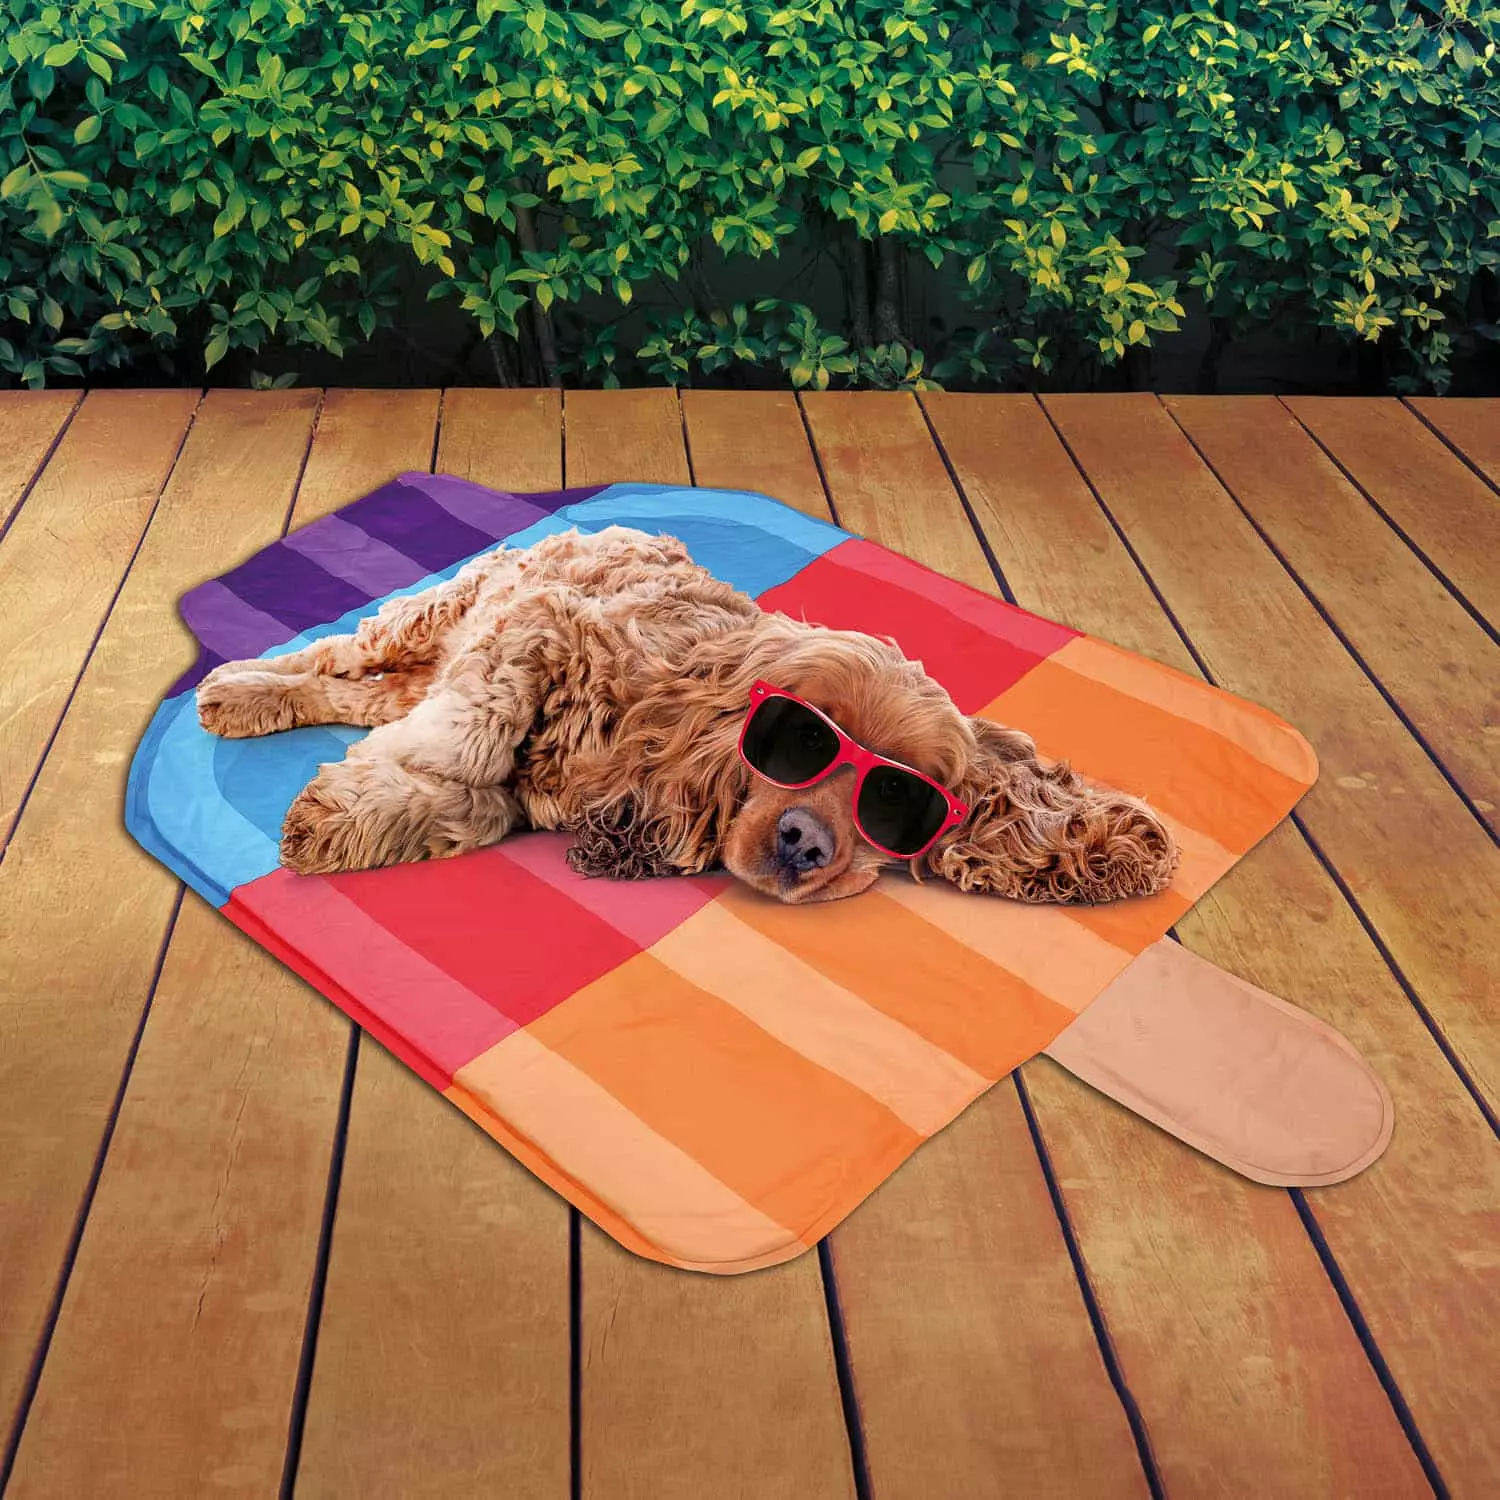 B&M's cooling mats could help keep the dogs cool (